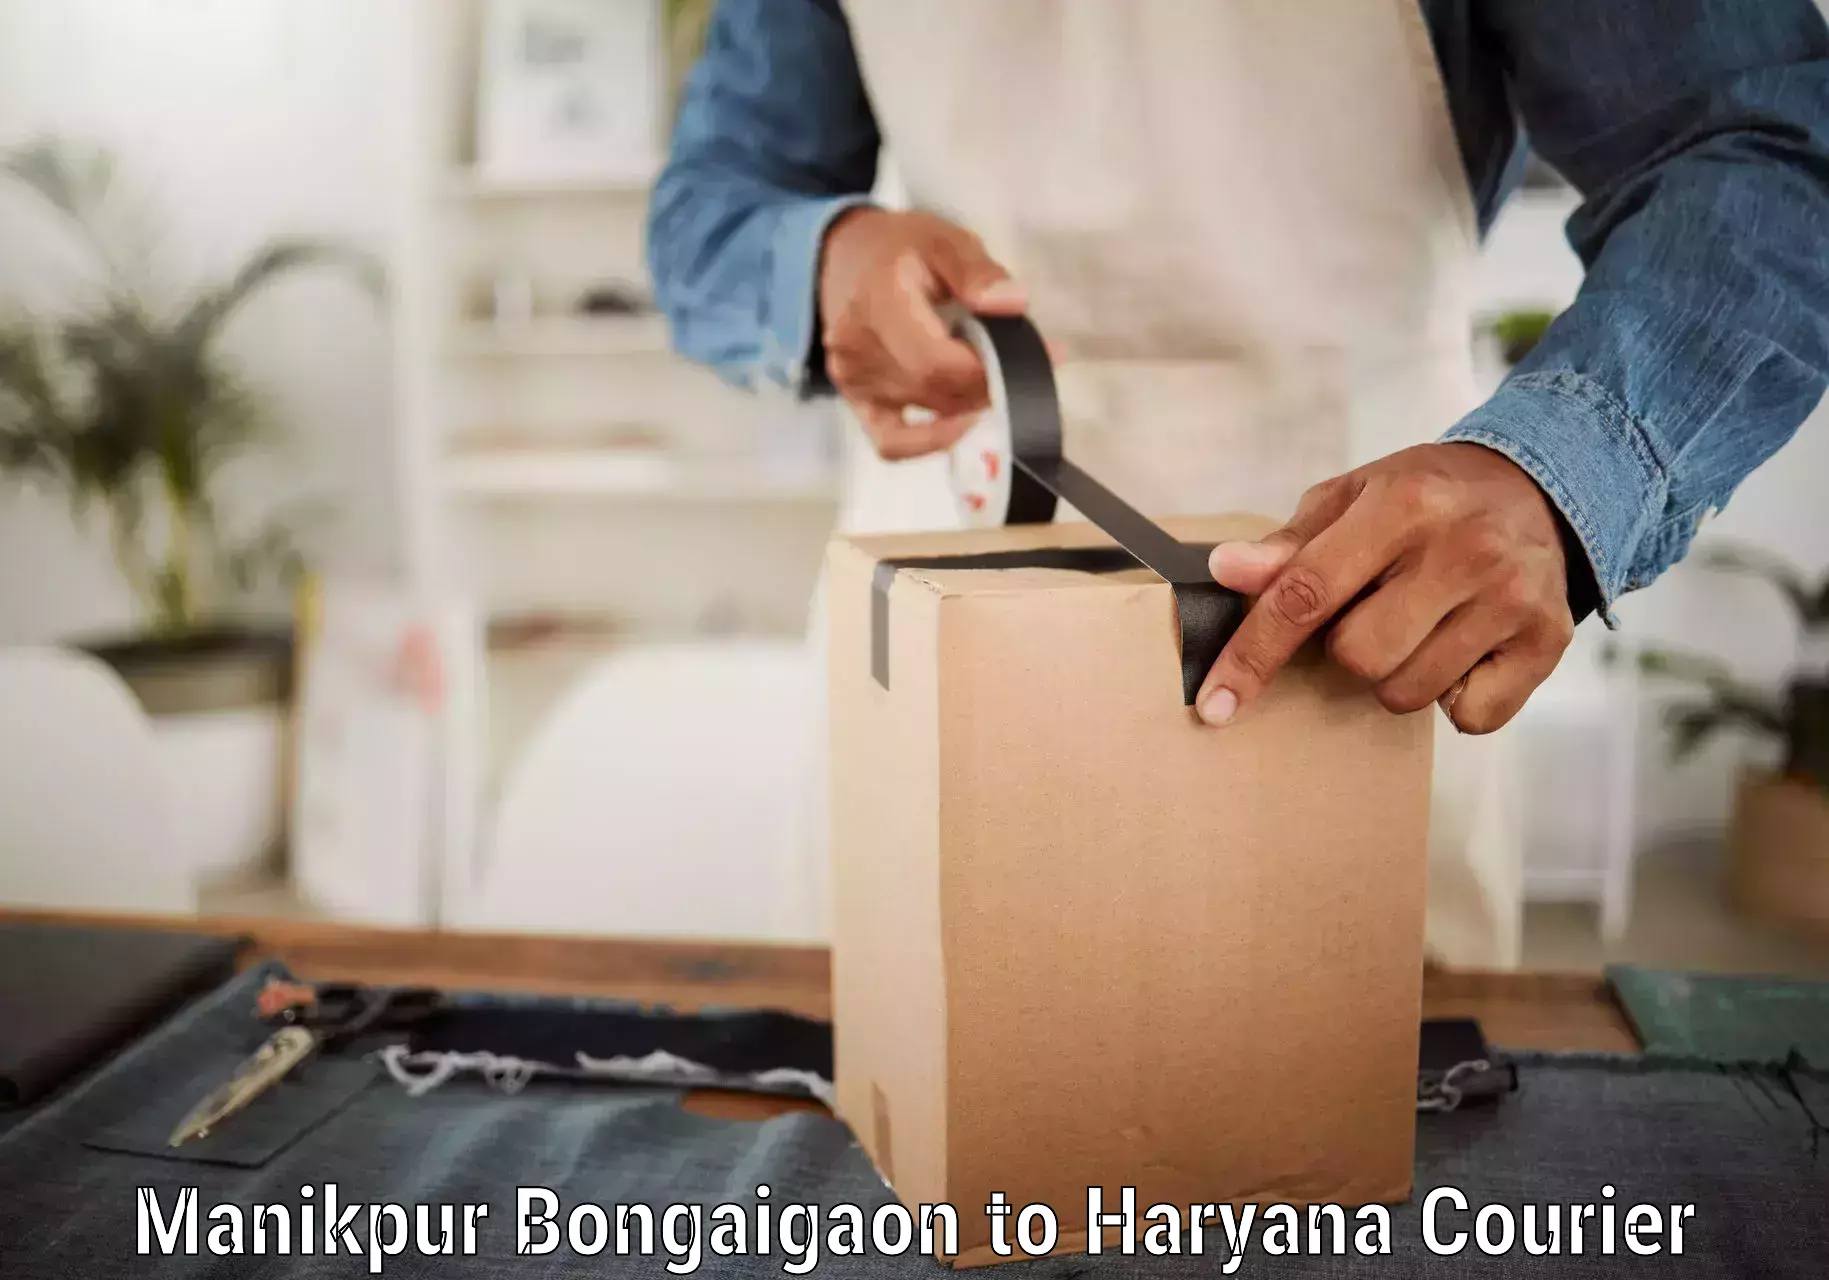 Fast-track shipping solutions Manikpur Bongaigaon to Rohtak